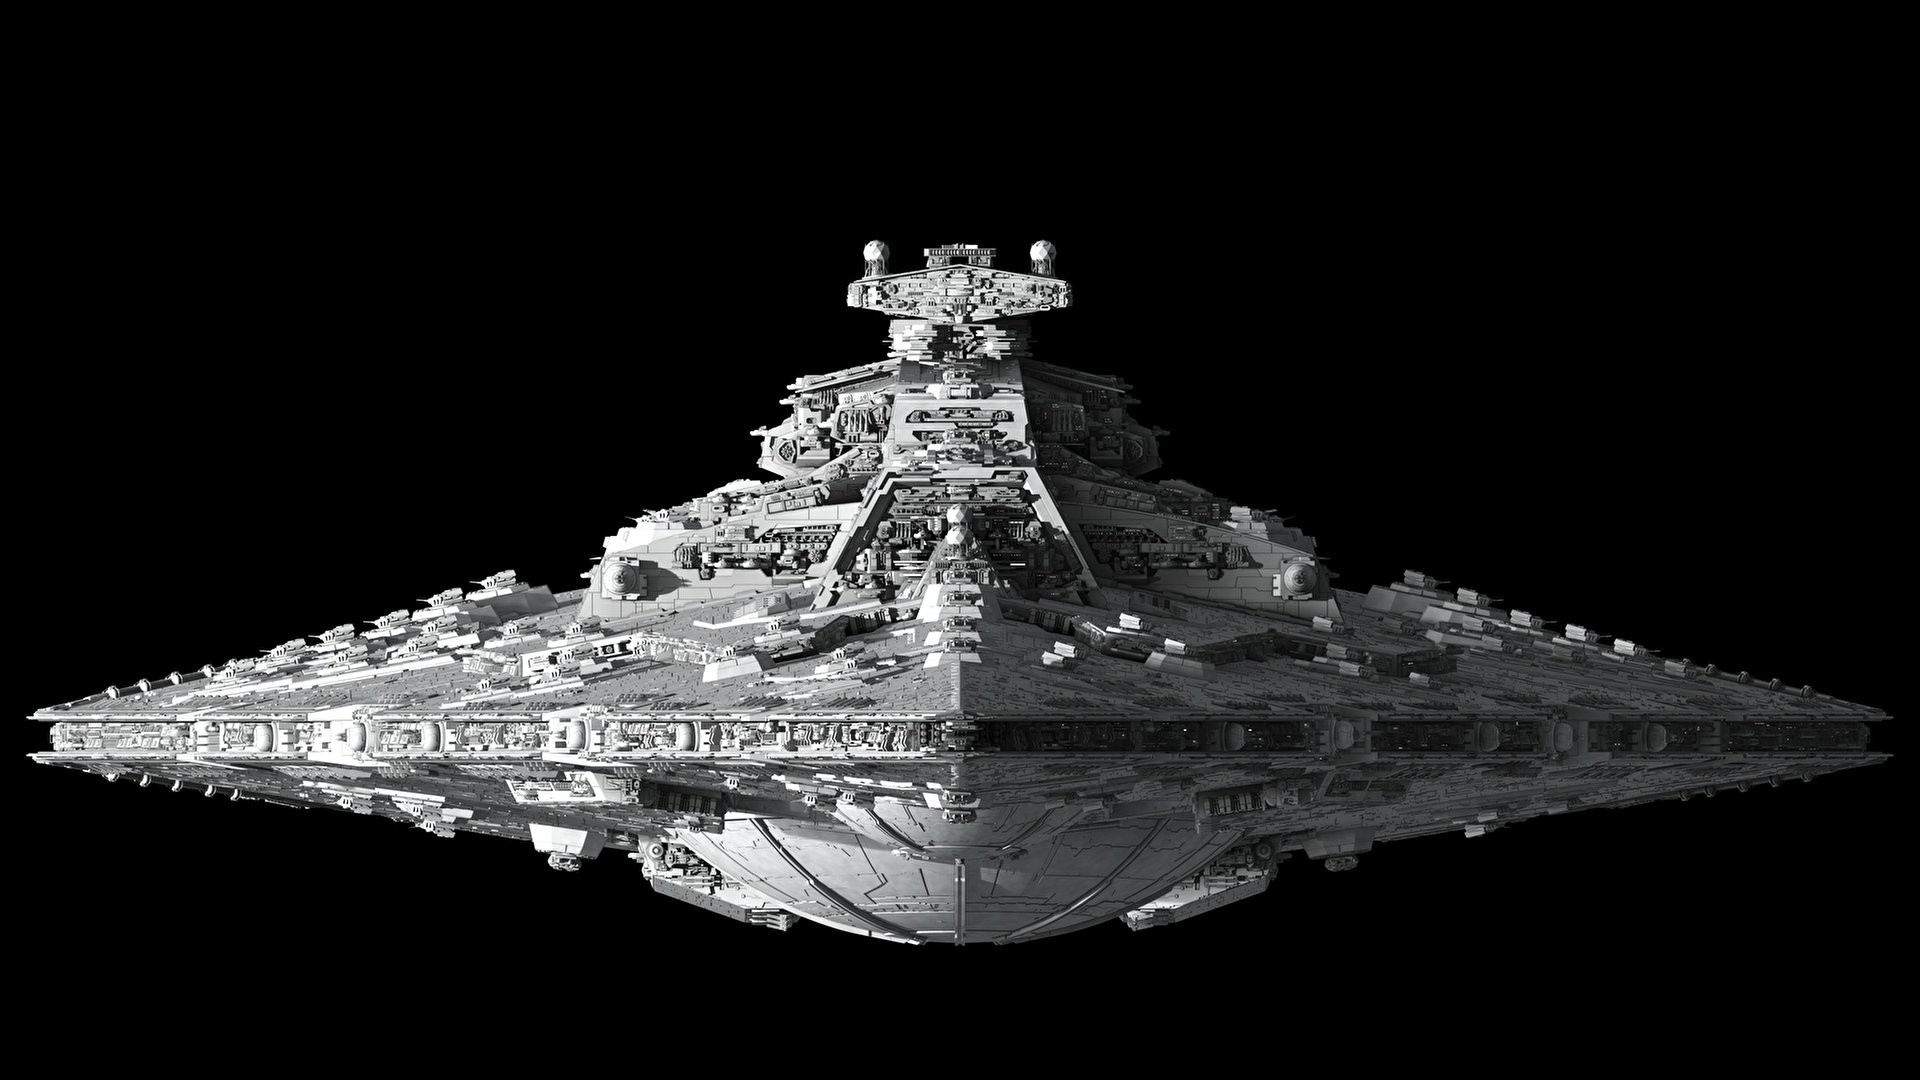 1920x1080 [] Star Destroyer Need #iPhone #6S #Plus #Wallpaper/ #Background  for #IPhone6SPlus? Follow iPhone 6S Plus 3Wallpapers/ #Backgrounds Must t…